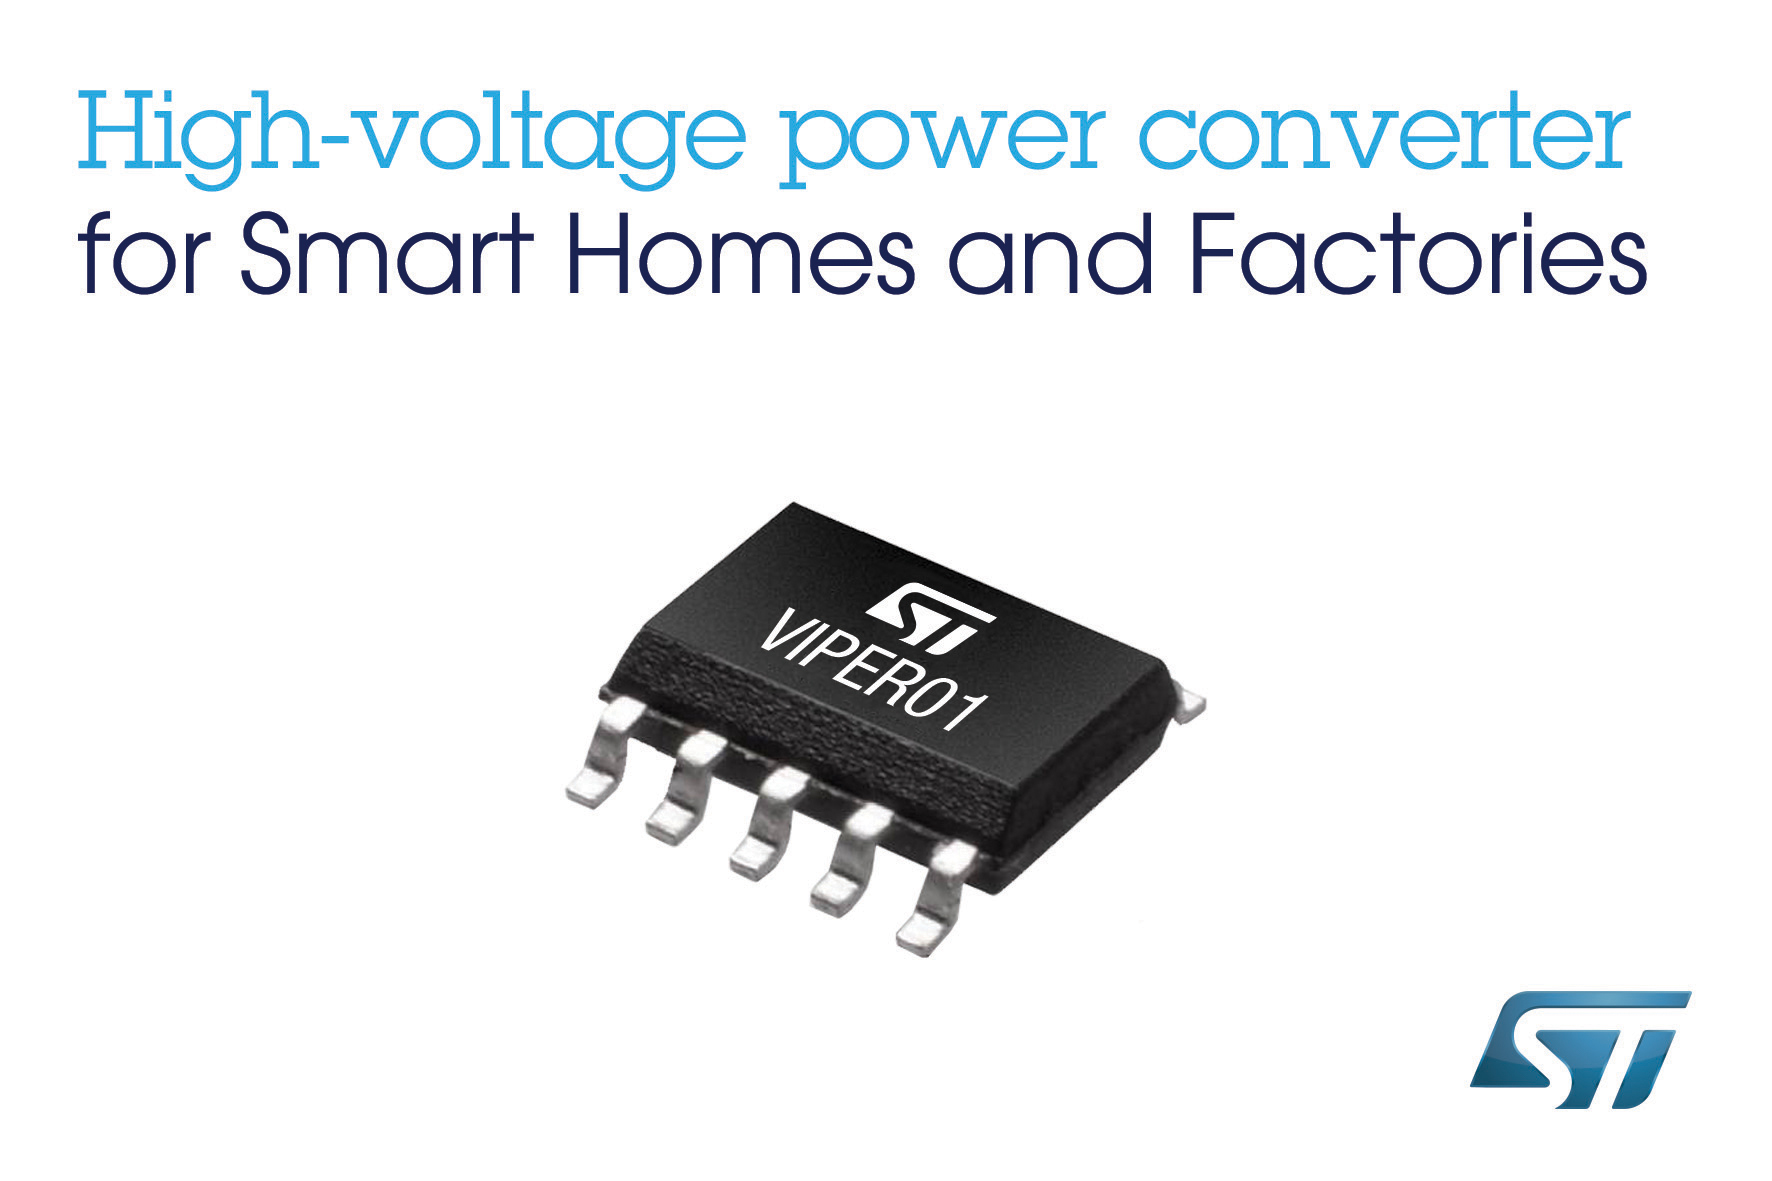 STMicroelectronics unveils high-voltage power converter for ultra-low-consumption, simple, and cost-effective SMPS (Switched-Mode Power Supply) with 5V output voltage 